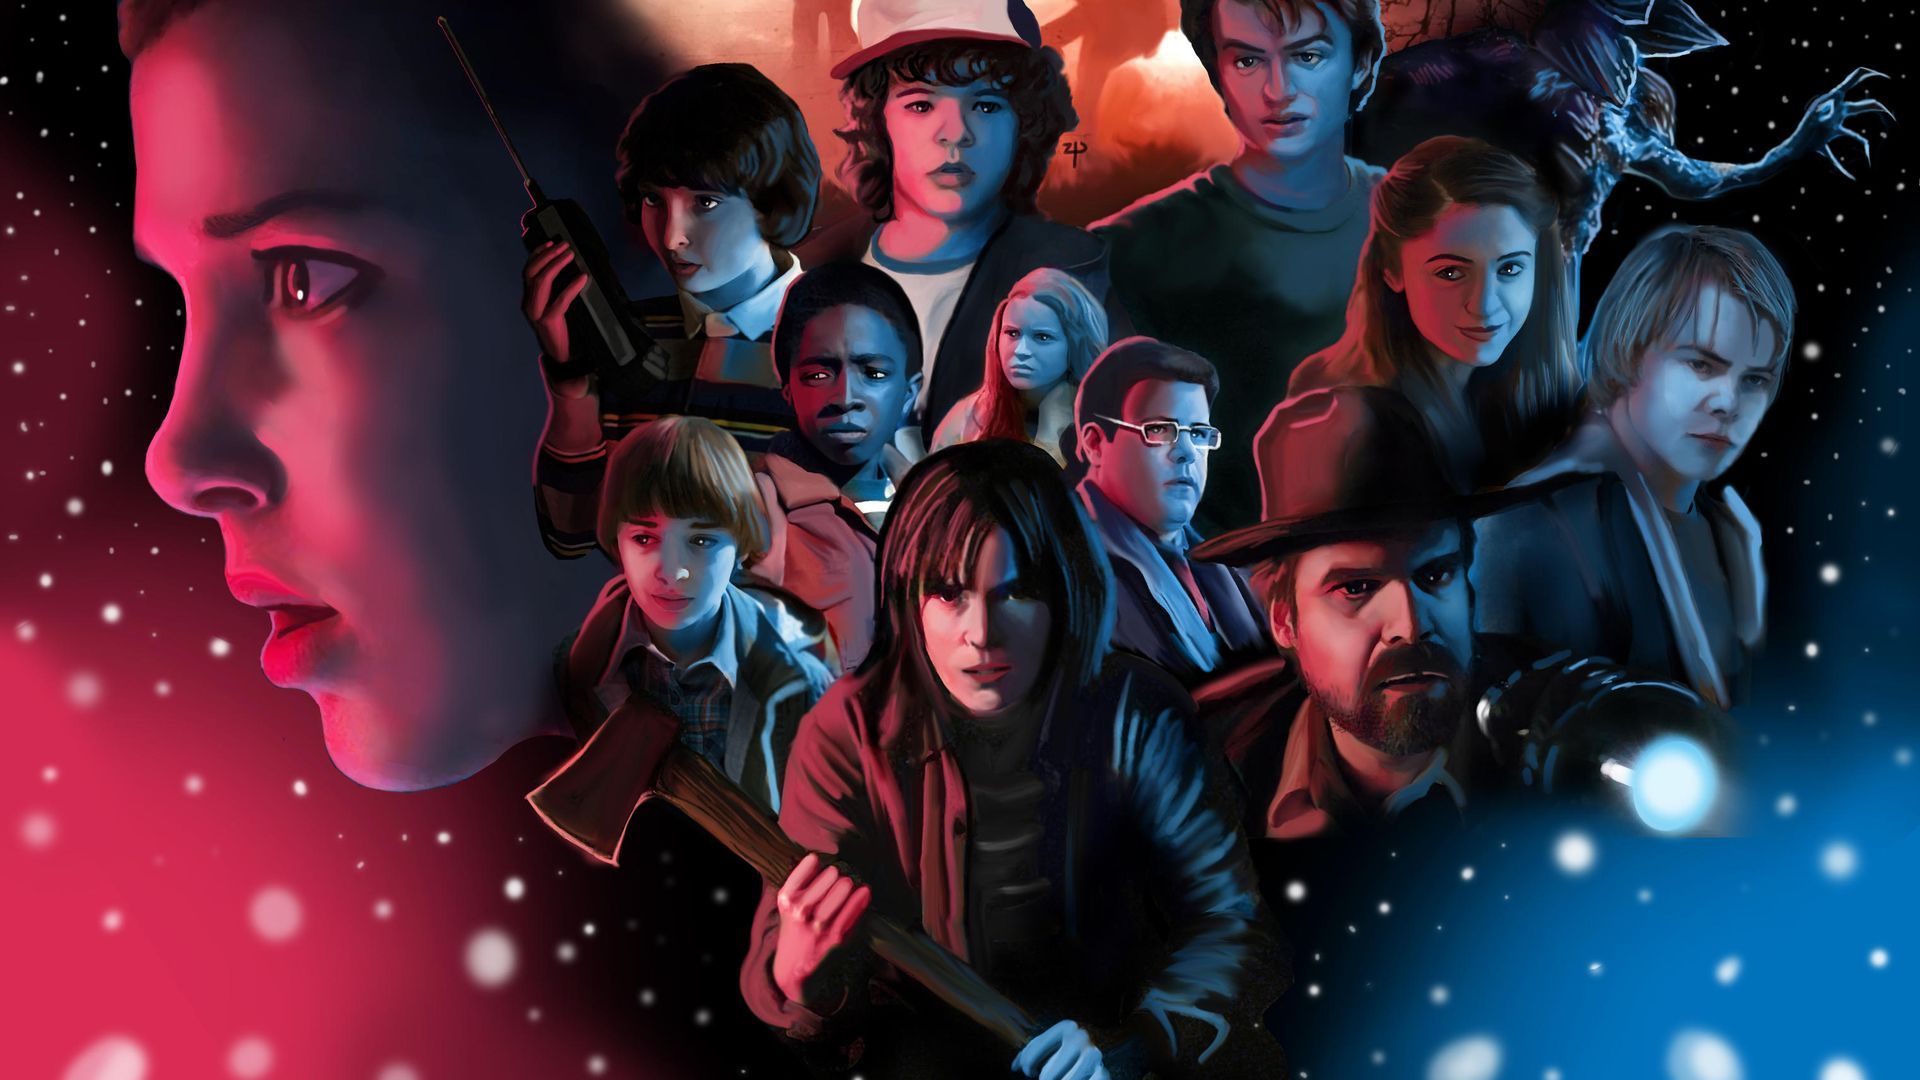 Stranger things 3, The Game review (A 2D Game). Stranger things